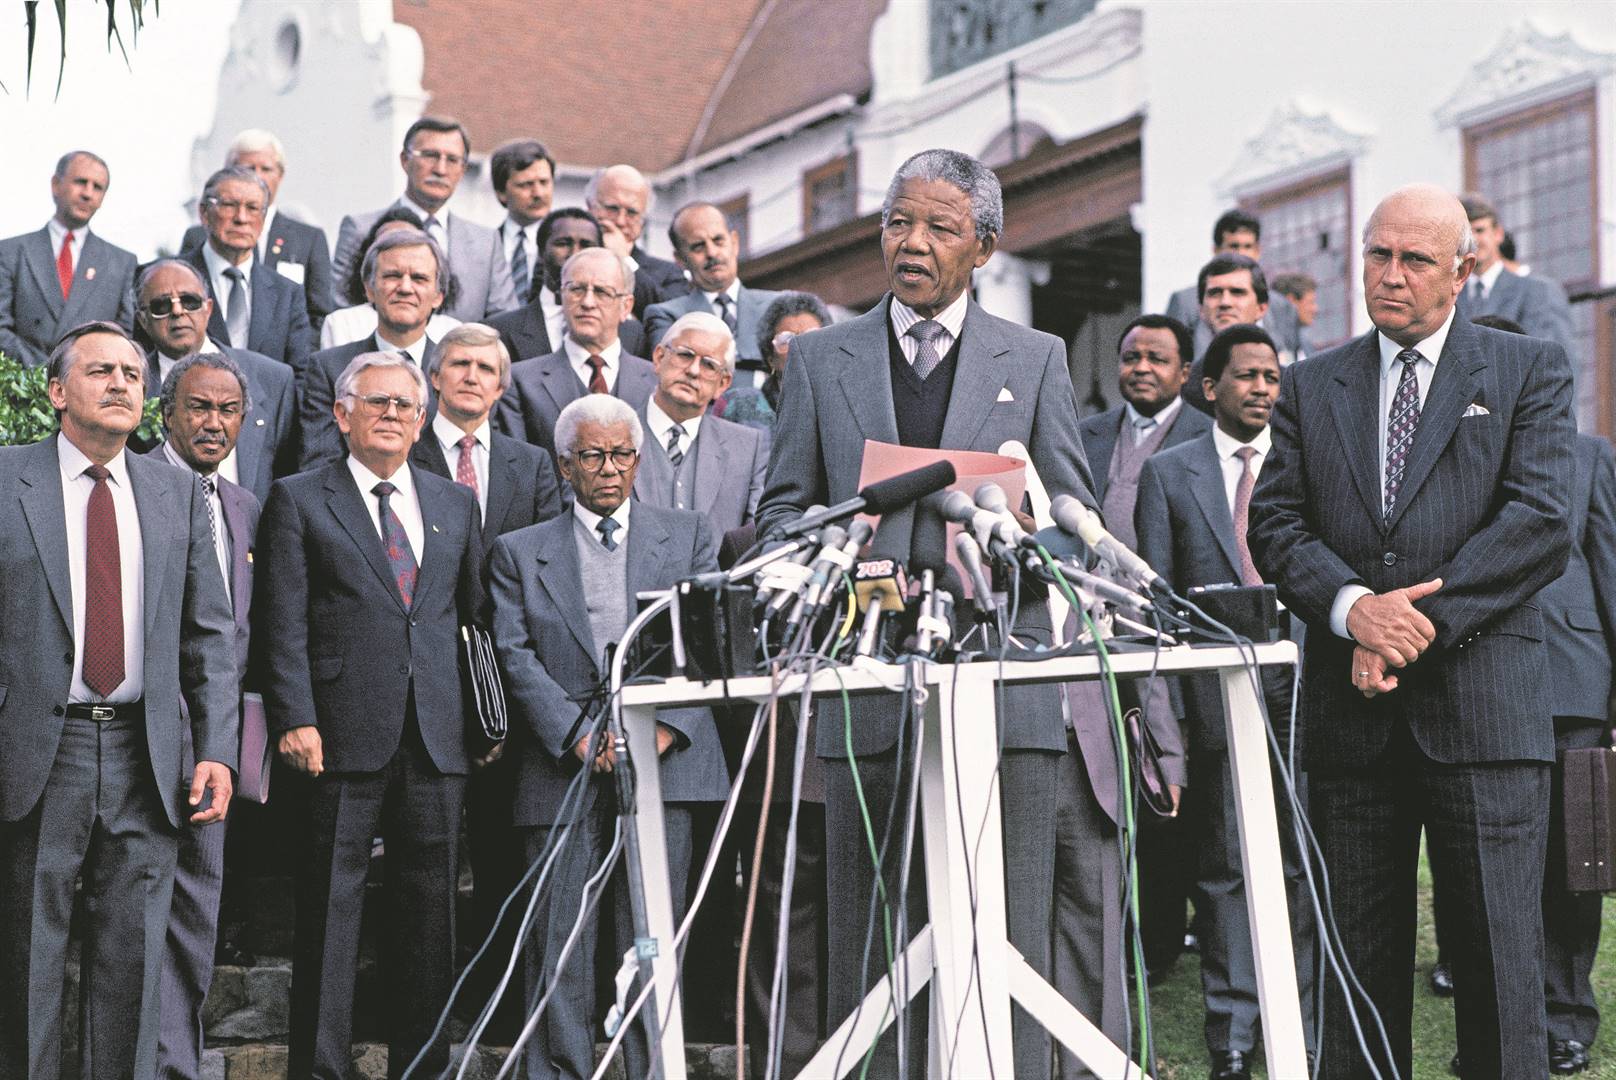 The Groote Schuur Minute was signed by Nelson Mandela, then president of the ANC, and then president FW de Klerk at Tuinhuis in Cape Town on May 4 1990. The document was a commitment by the two parties to resolve the existing climate of violence, as well as a commitment to stability and peaceful constitutional negotiations.